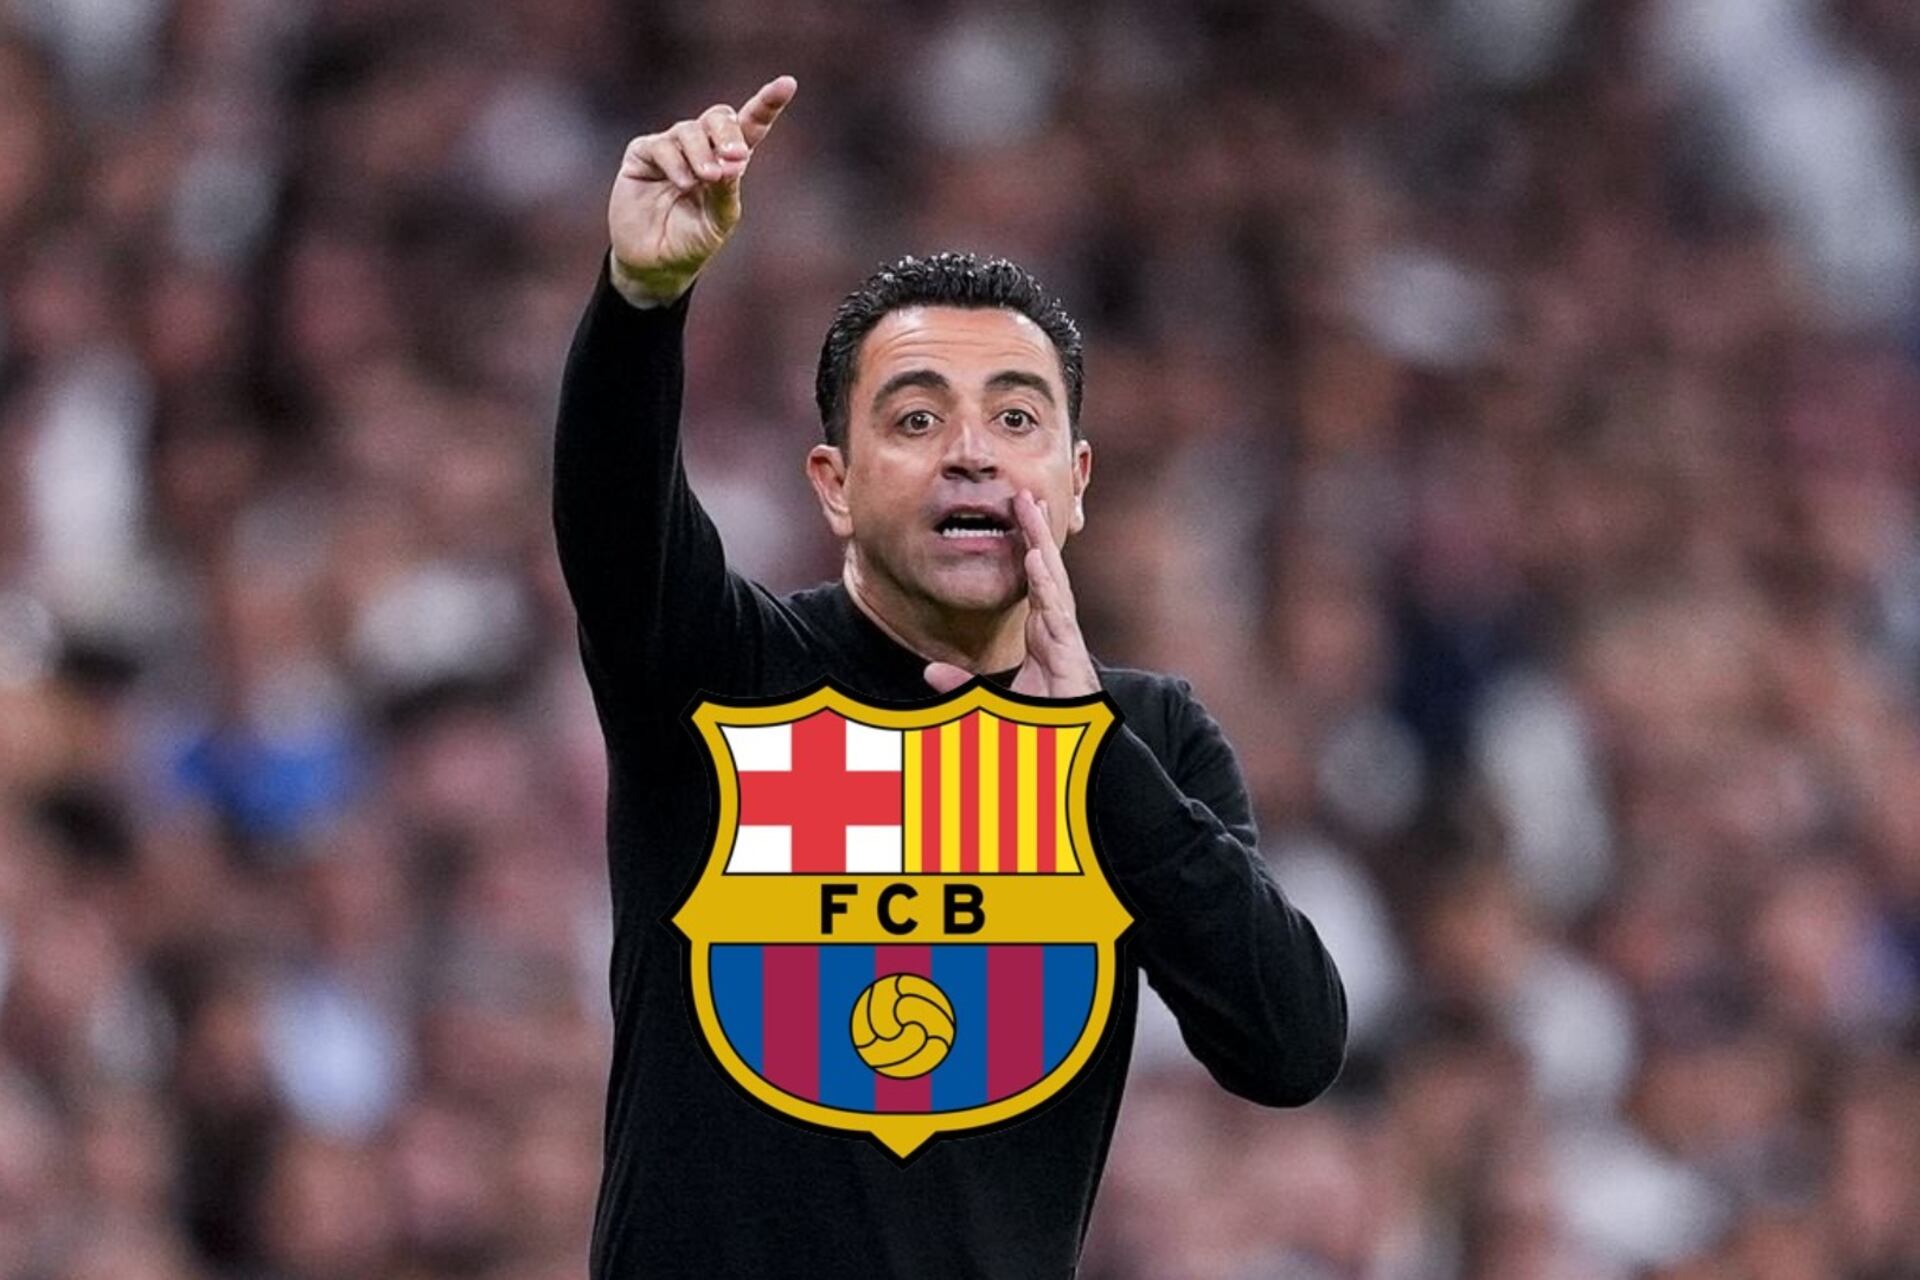 The most painful decision for Xavi, he will stay at Barcelona but under this difficult condition